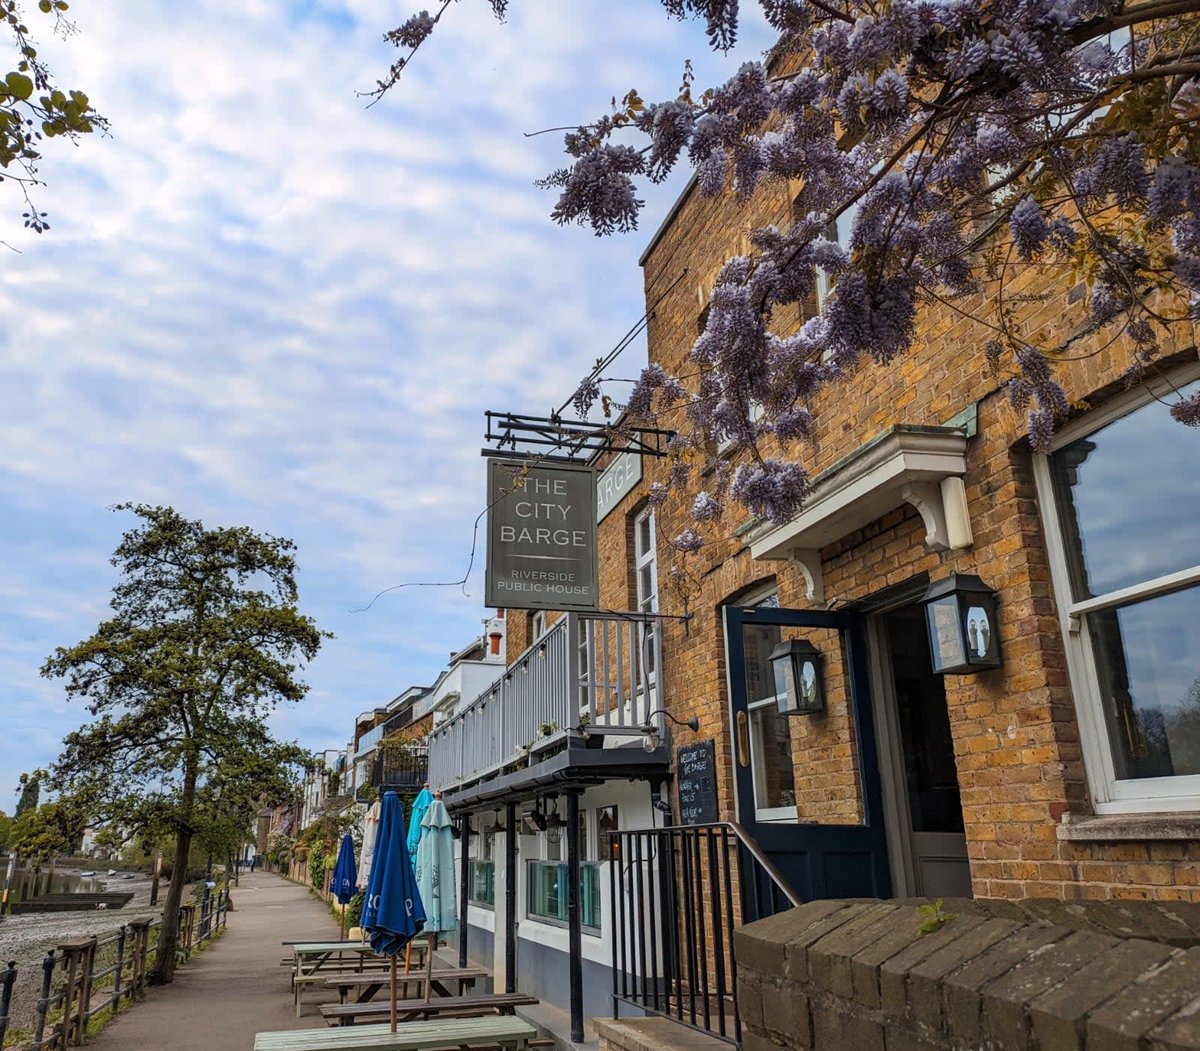 Walking the dog or taking a stroll along the river? Pop in and warm up with a coffee, soup, or a cheeky pint! #spring #riverside #chiswick #dogfriendly #riverviews #soup